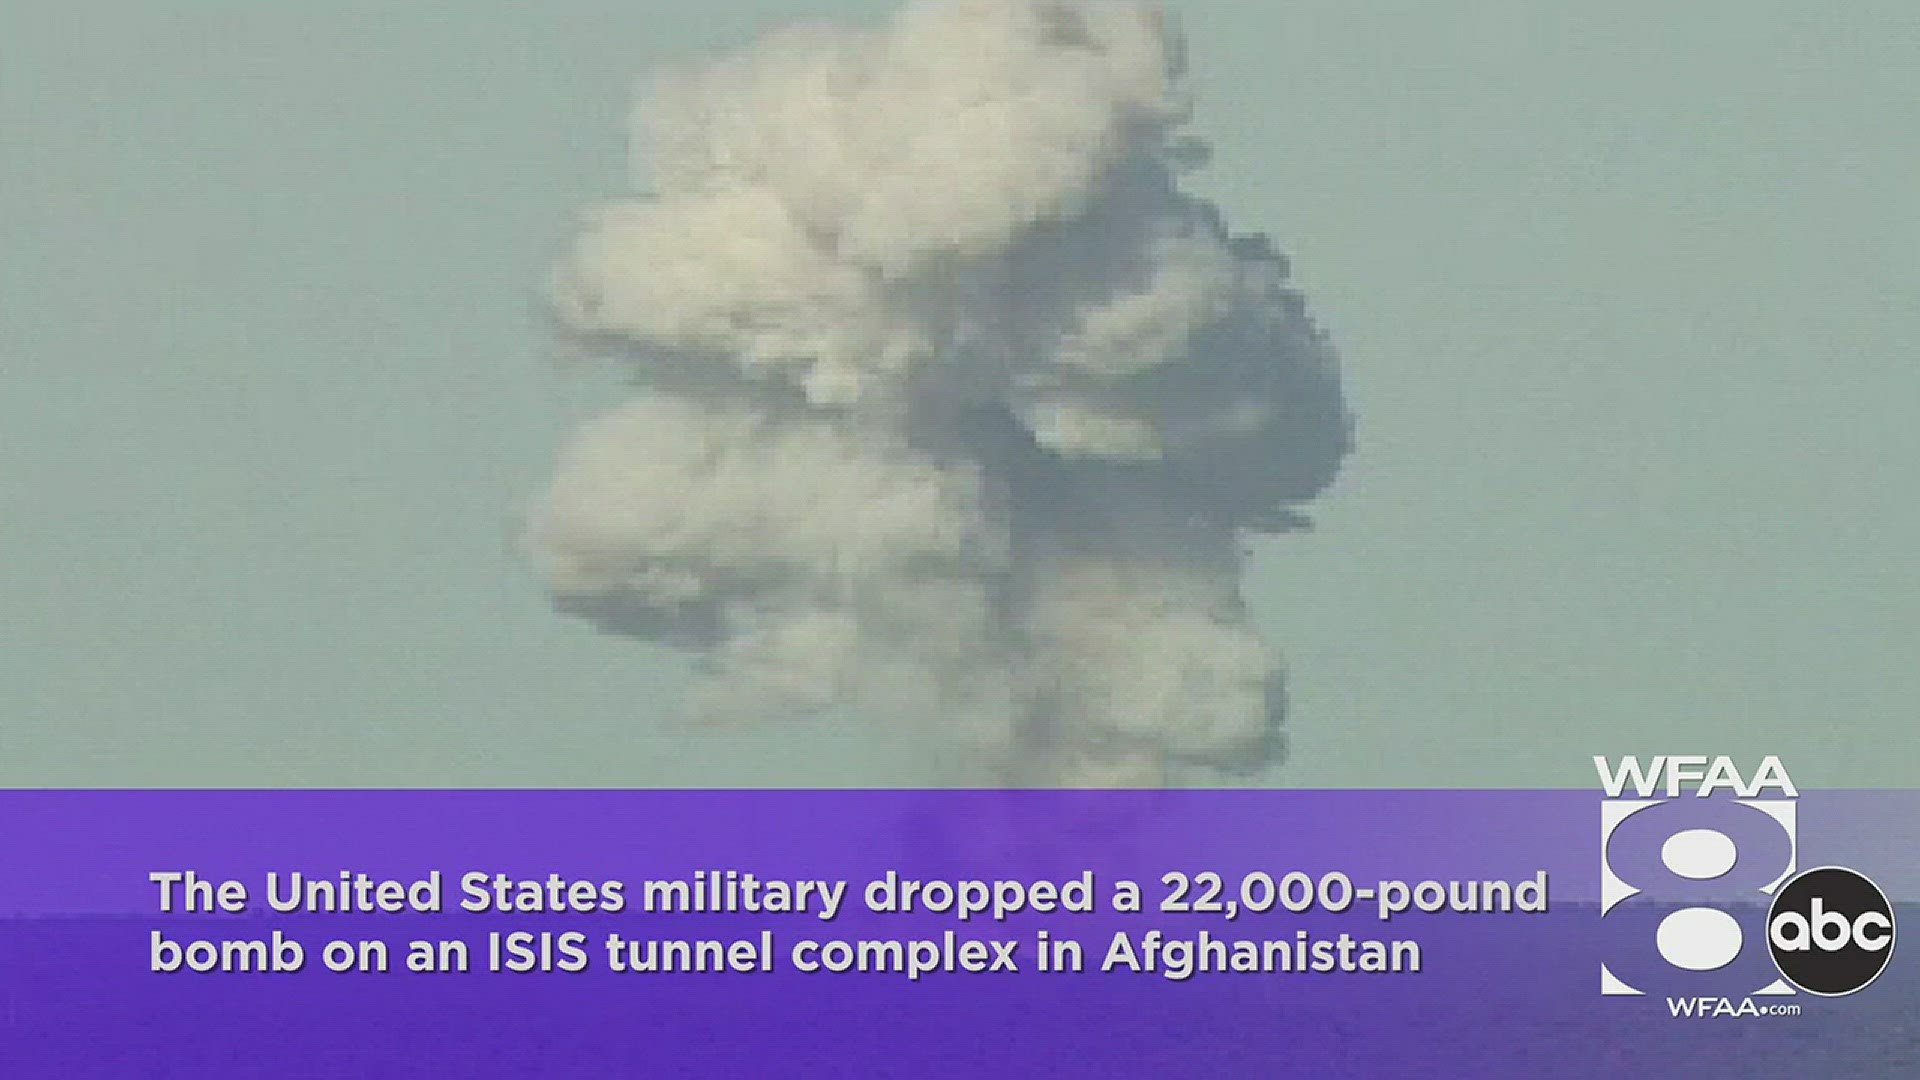 An explainer on the "Mother of all Bombs," which the U.S. dropped on ISIS tunnels in Afghanistan. WFAA.com